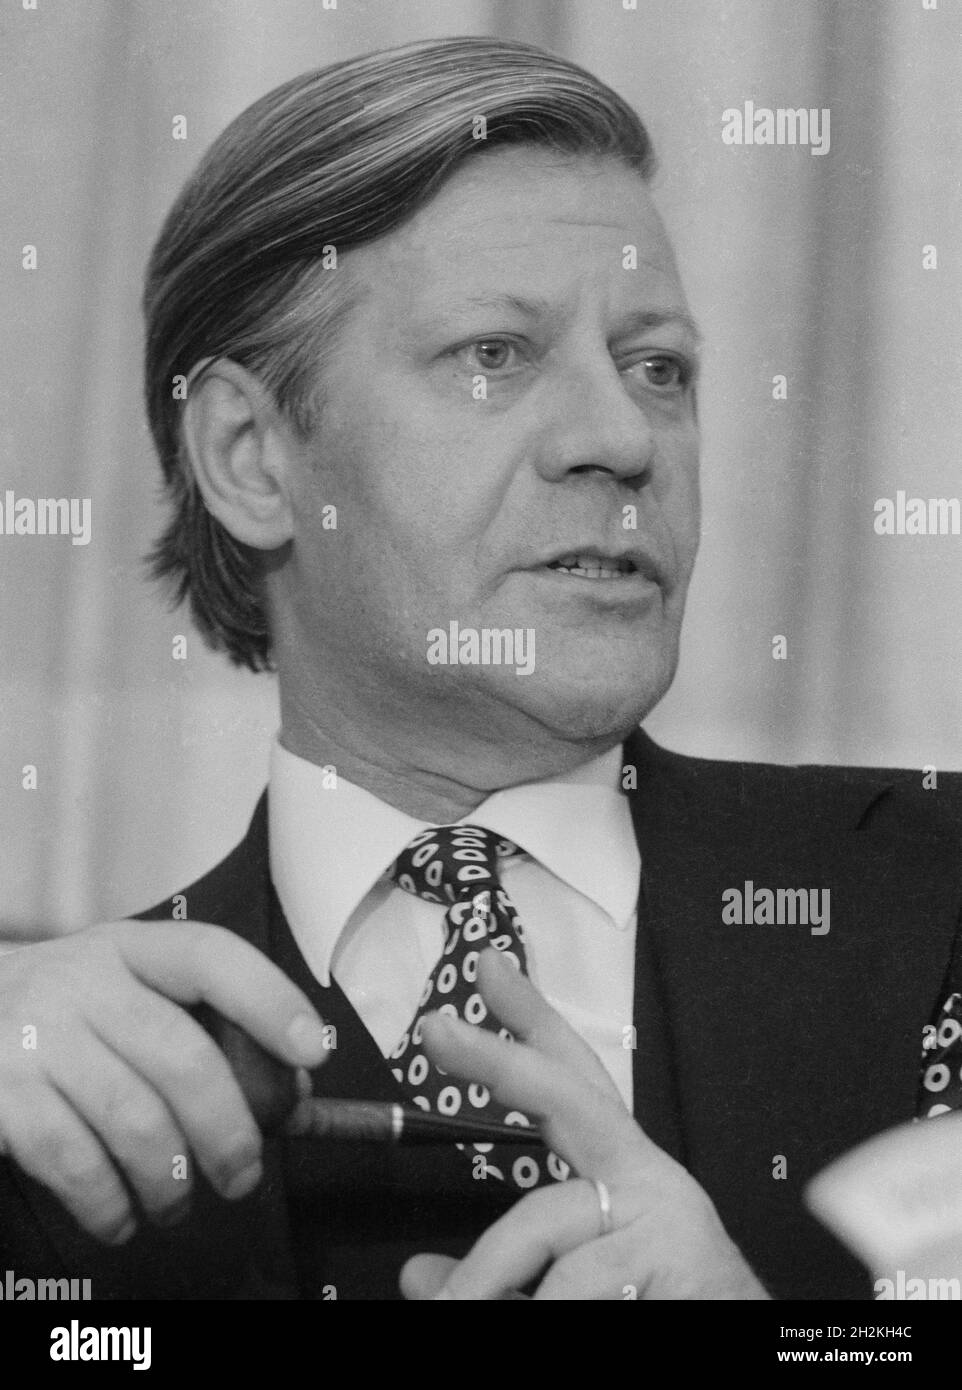 Helmut Schmidt, born 23 December 1918 is a German Social Democratic politician who served as Chancellor of West Germany from 1974 to 1982 - picture ta Stock Photo